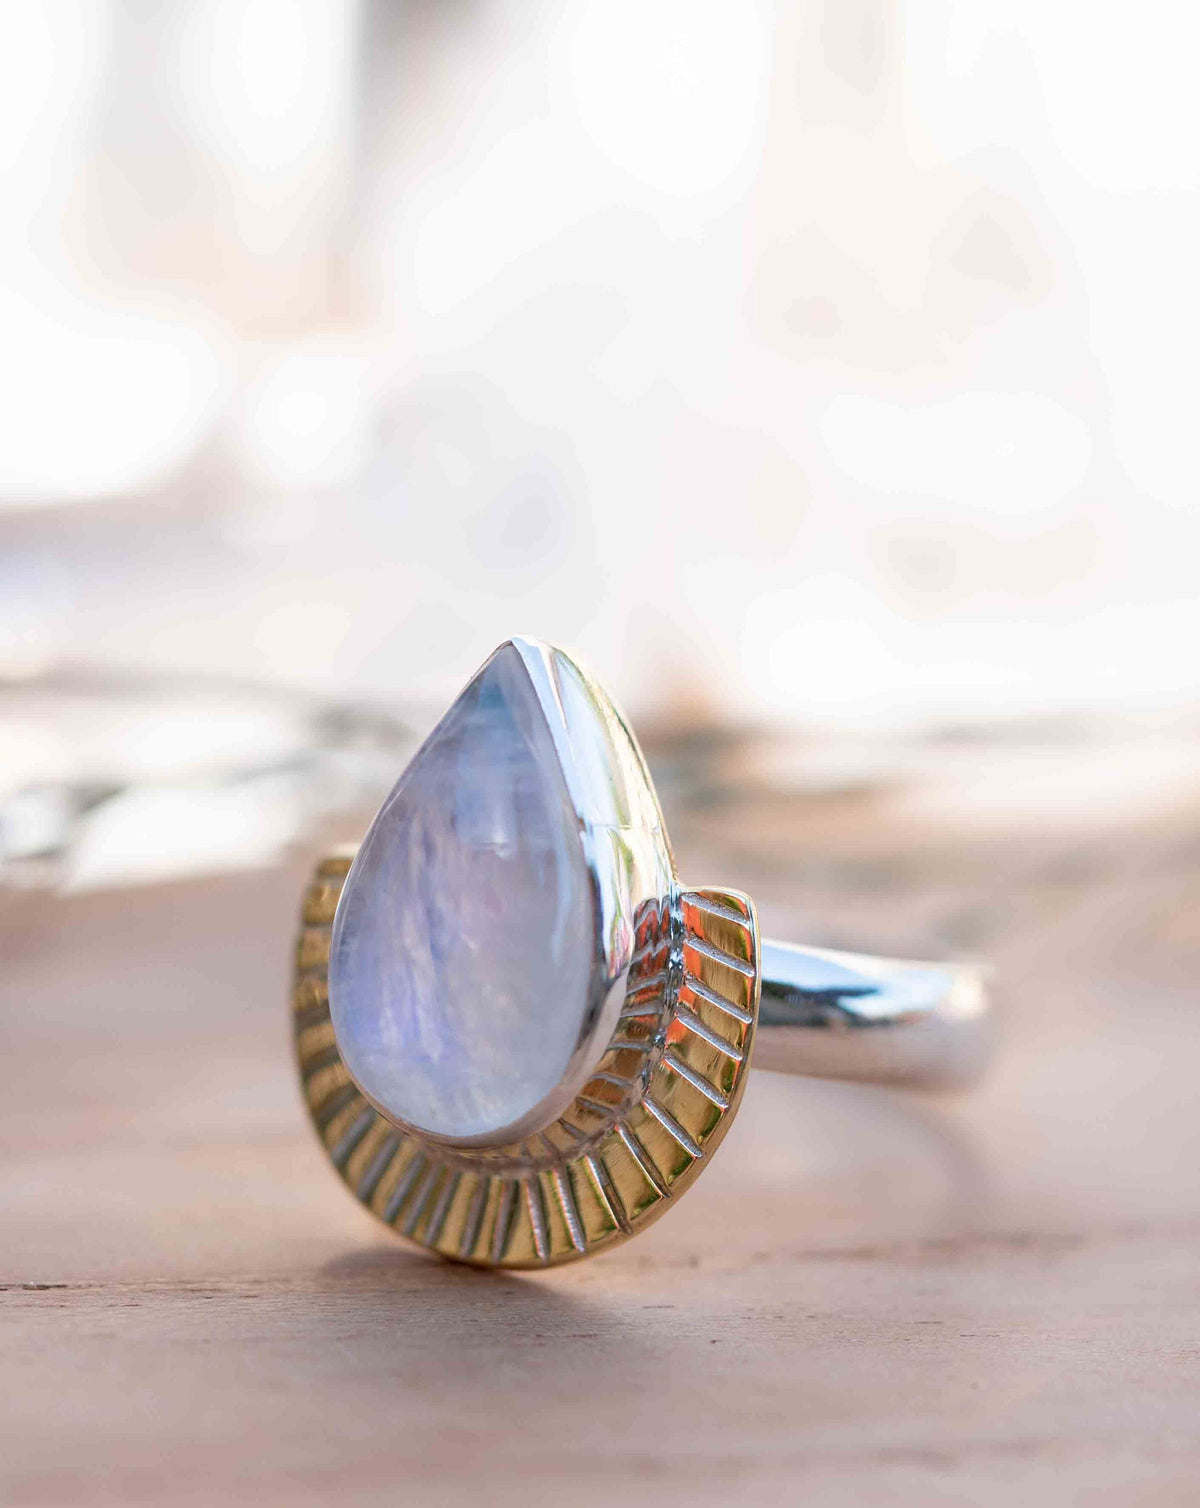 Moonstone Ring * Sterling Silver and Brass * Filigree * Handmade * Gemstone * Statement * Jewelry * Bycila * Gift For Her * BJR196